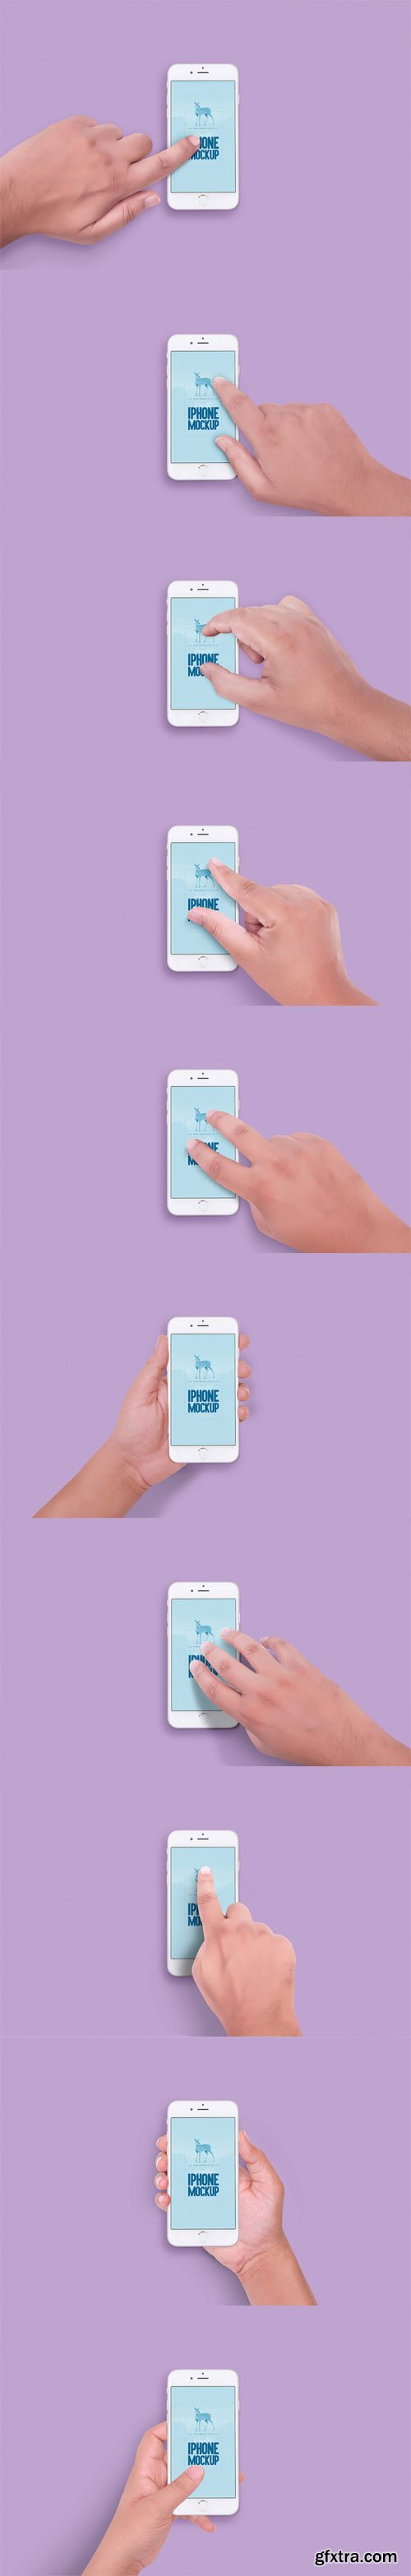 iPhone 6S Mockup With 7 Unique Gestures And 8 Holding Positions